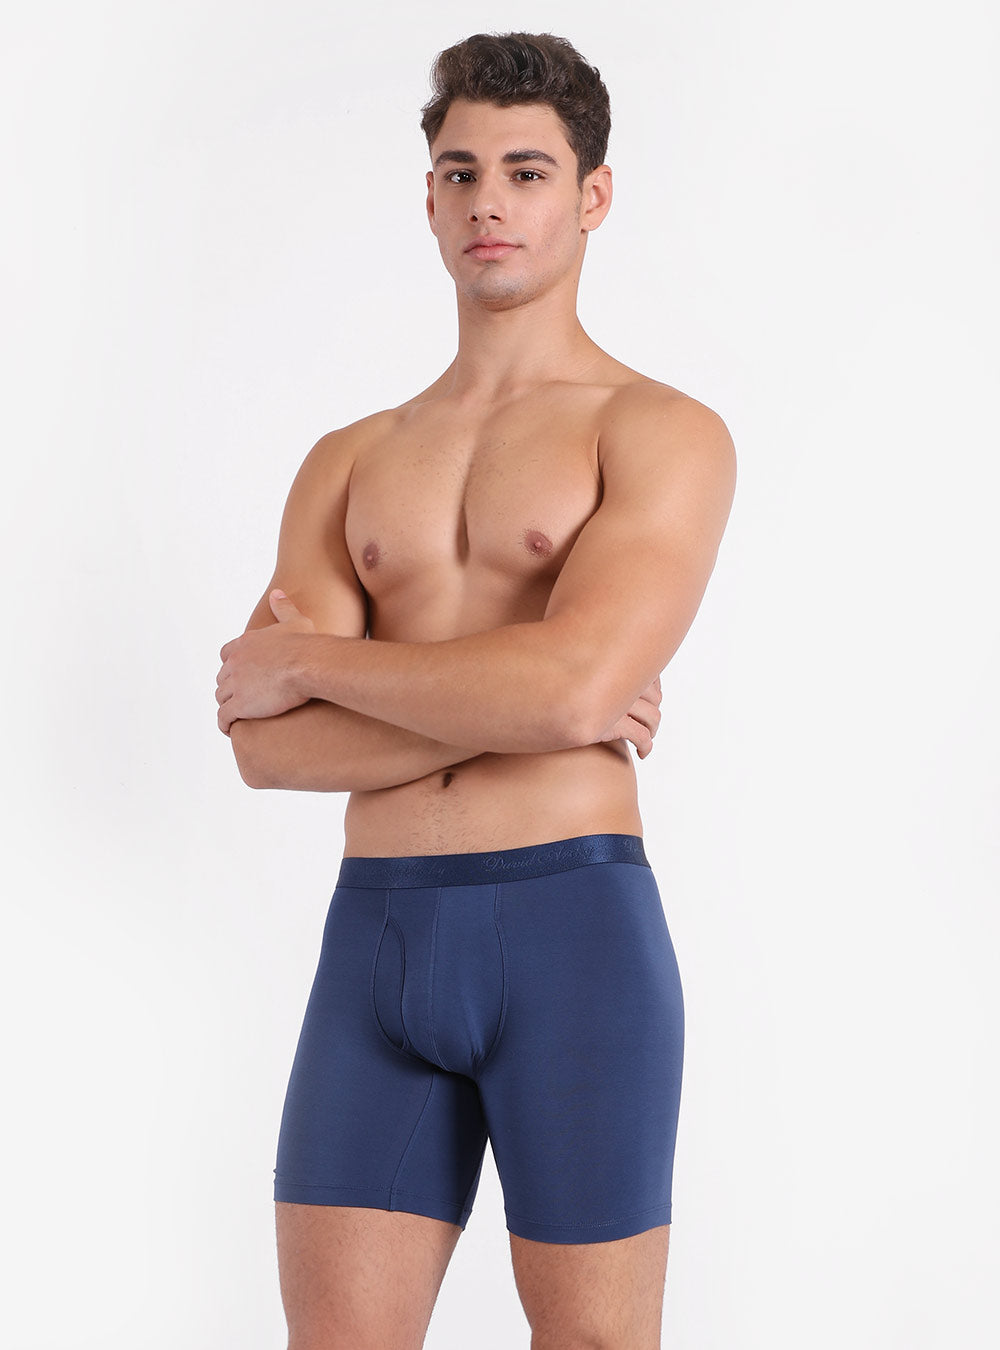 Silky feel, supportive fit. This is the SuperSoft Micromodal Trunks. 🩲Link  in bio to shop. #separatec #separatecunderwear #fashion #